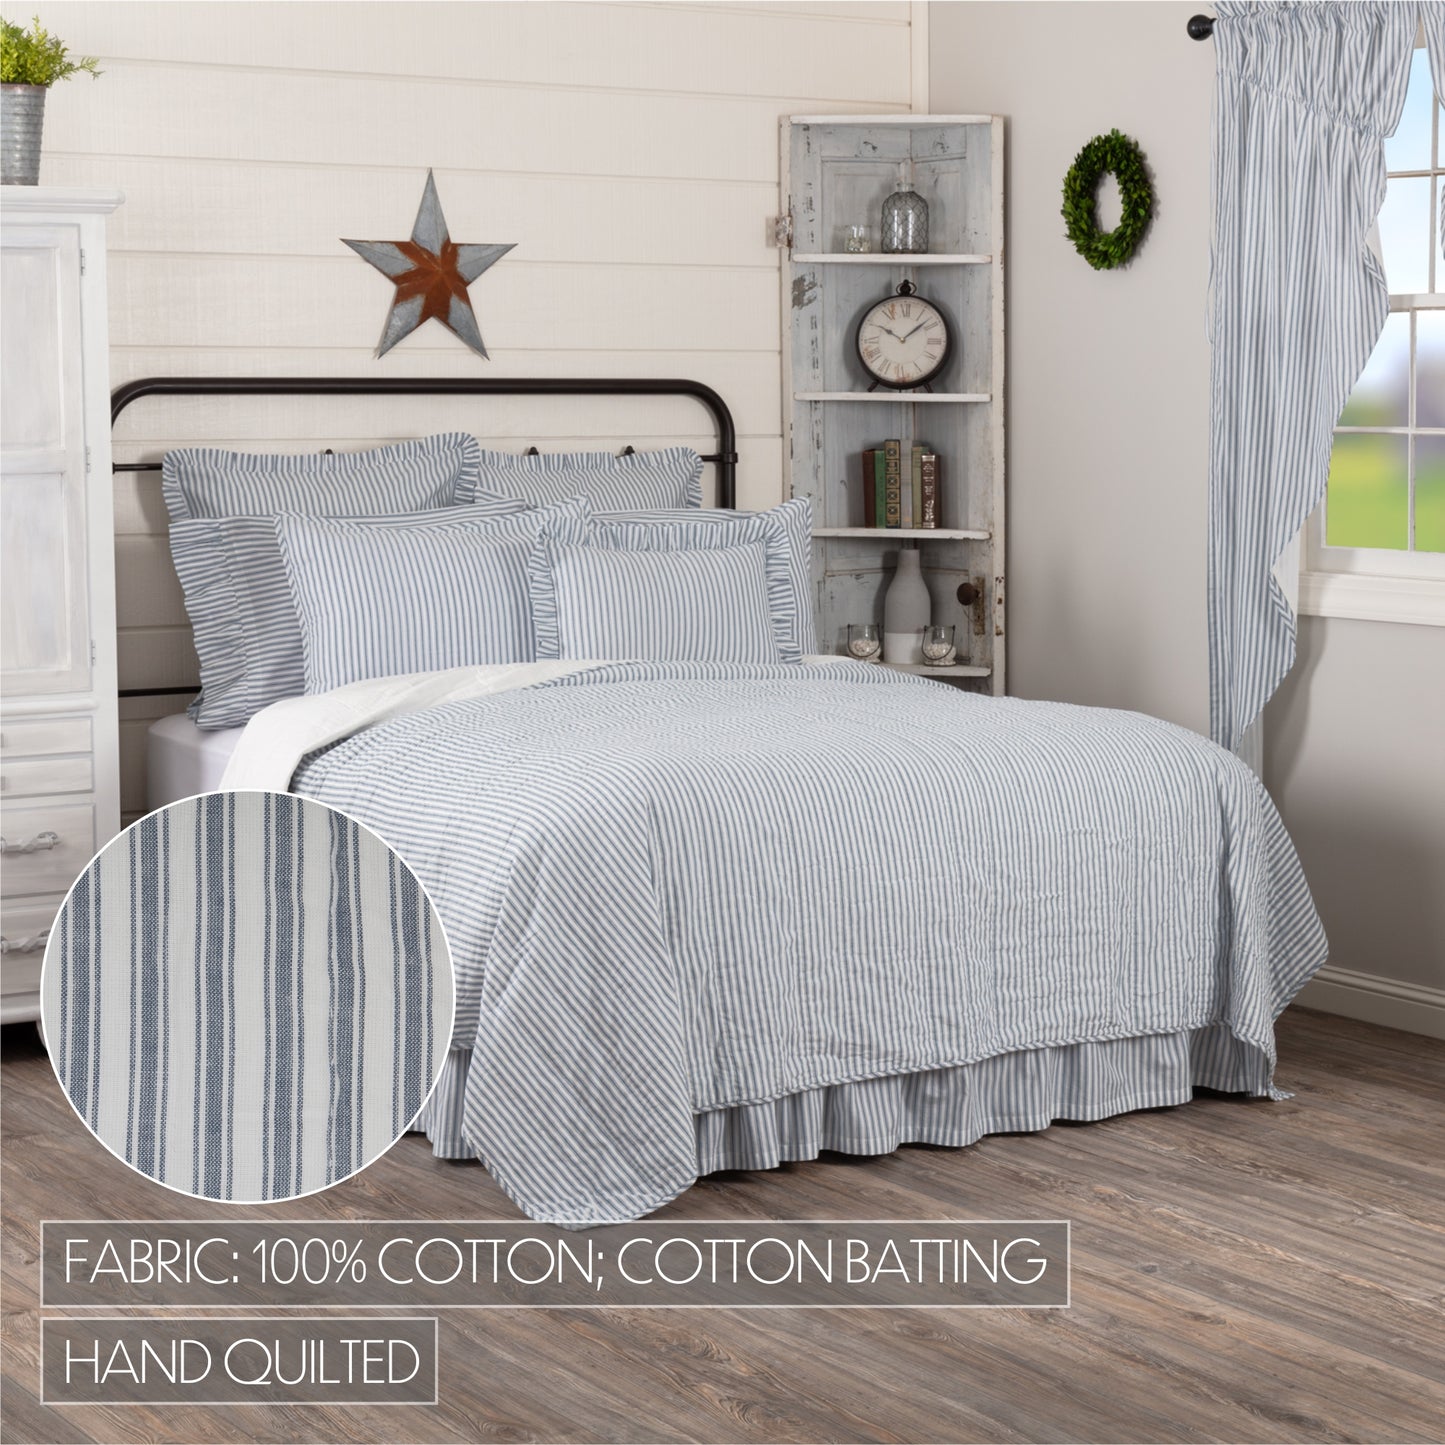 51902-Sawyer-Mill-Blue-Ticking-Stripe-King-Quilt-Coverlet-105Wx95L-image-2